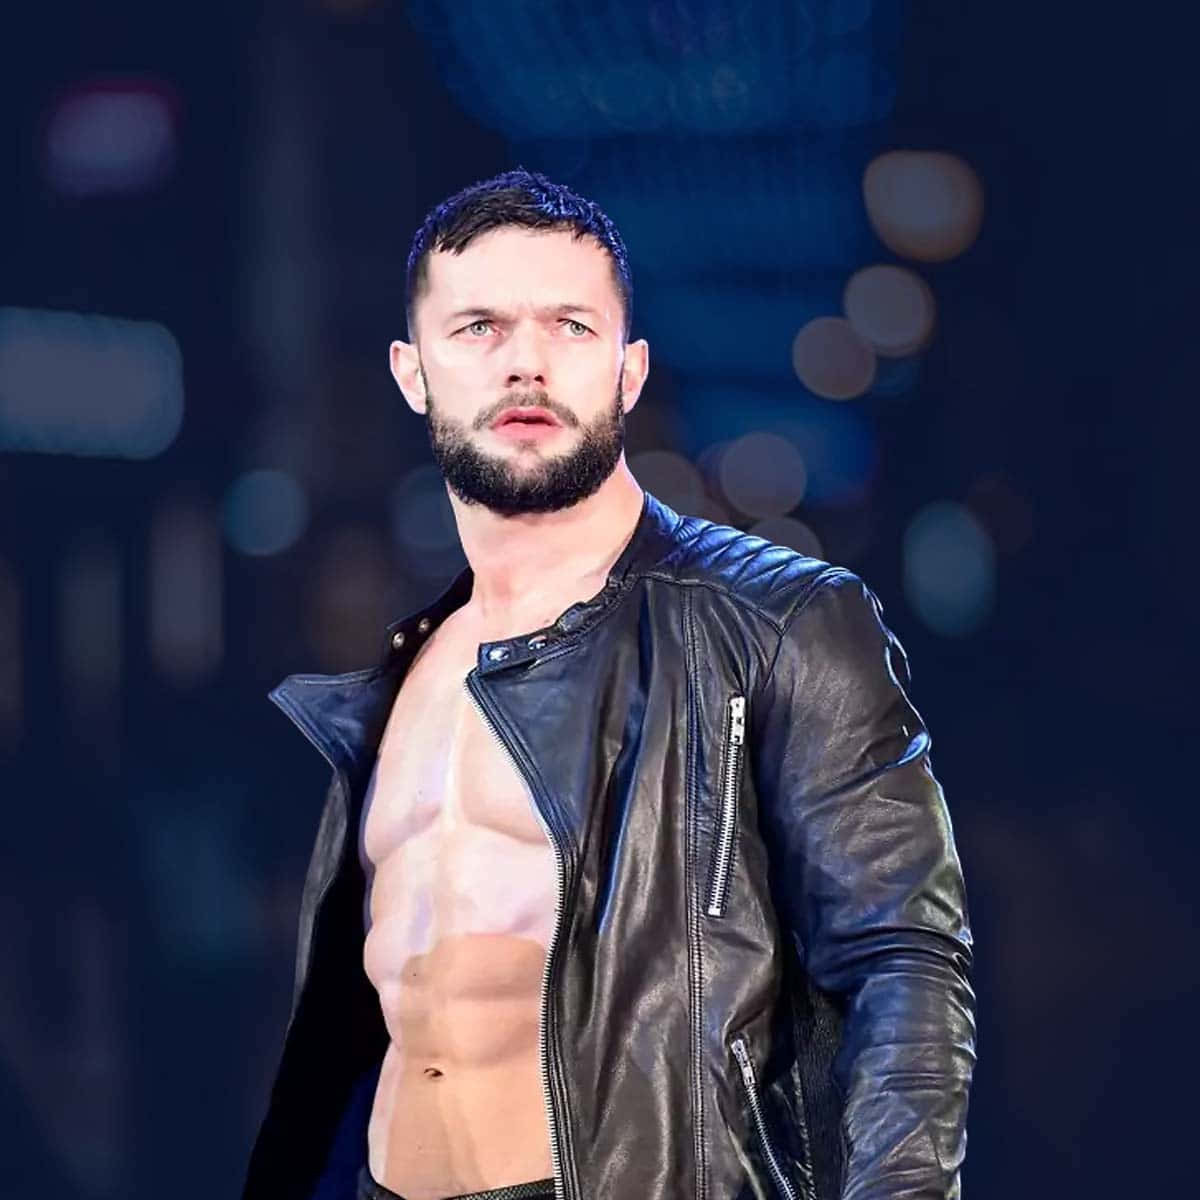 Fantastiskansikte Finn Balor (note: This Sentence May Not Make Sense On Its Own In Swedish. If You Provide More Context About What You Want The Sentence To Convey, I Could Provide A More Appropriate Translation). Wallpaper